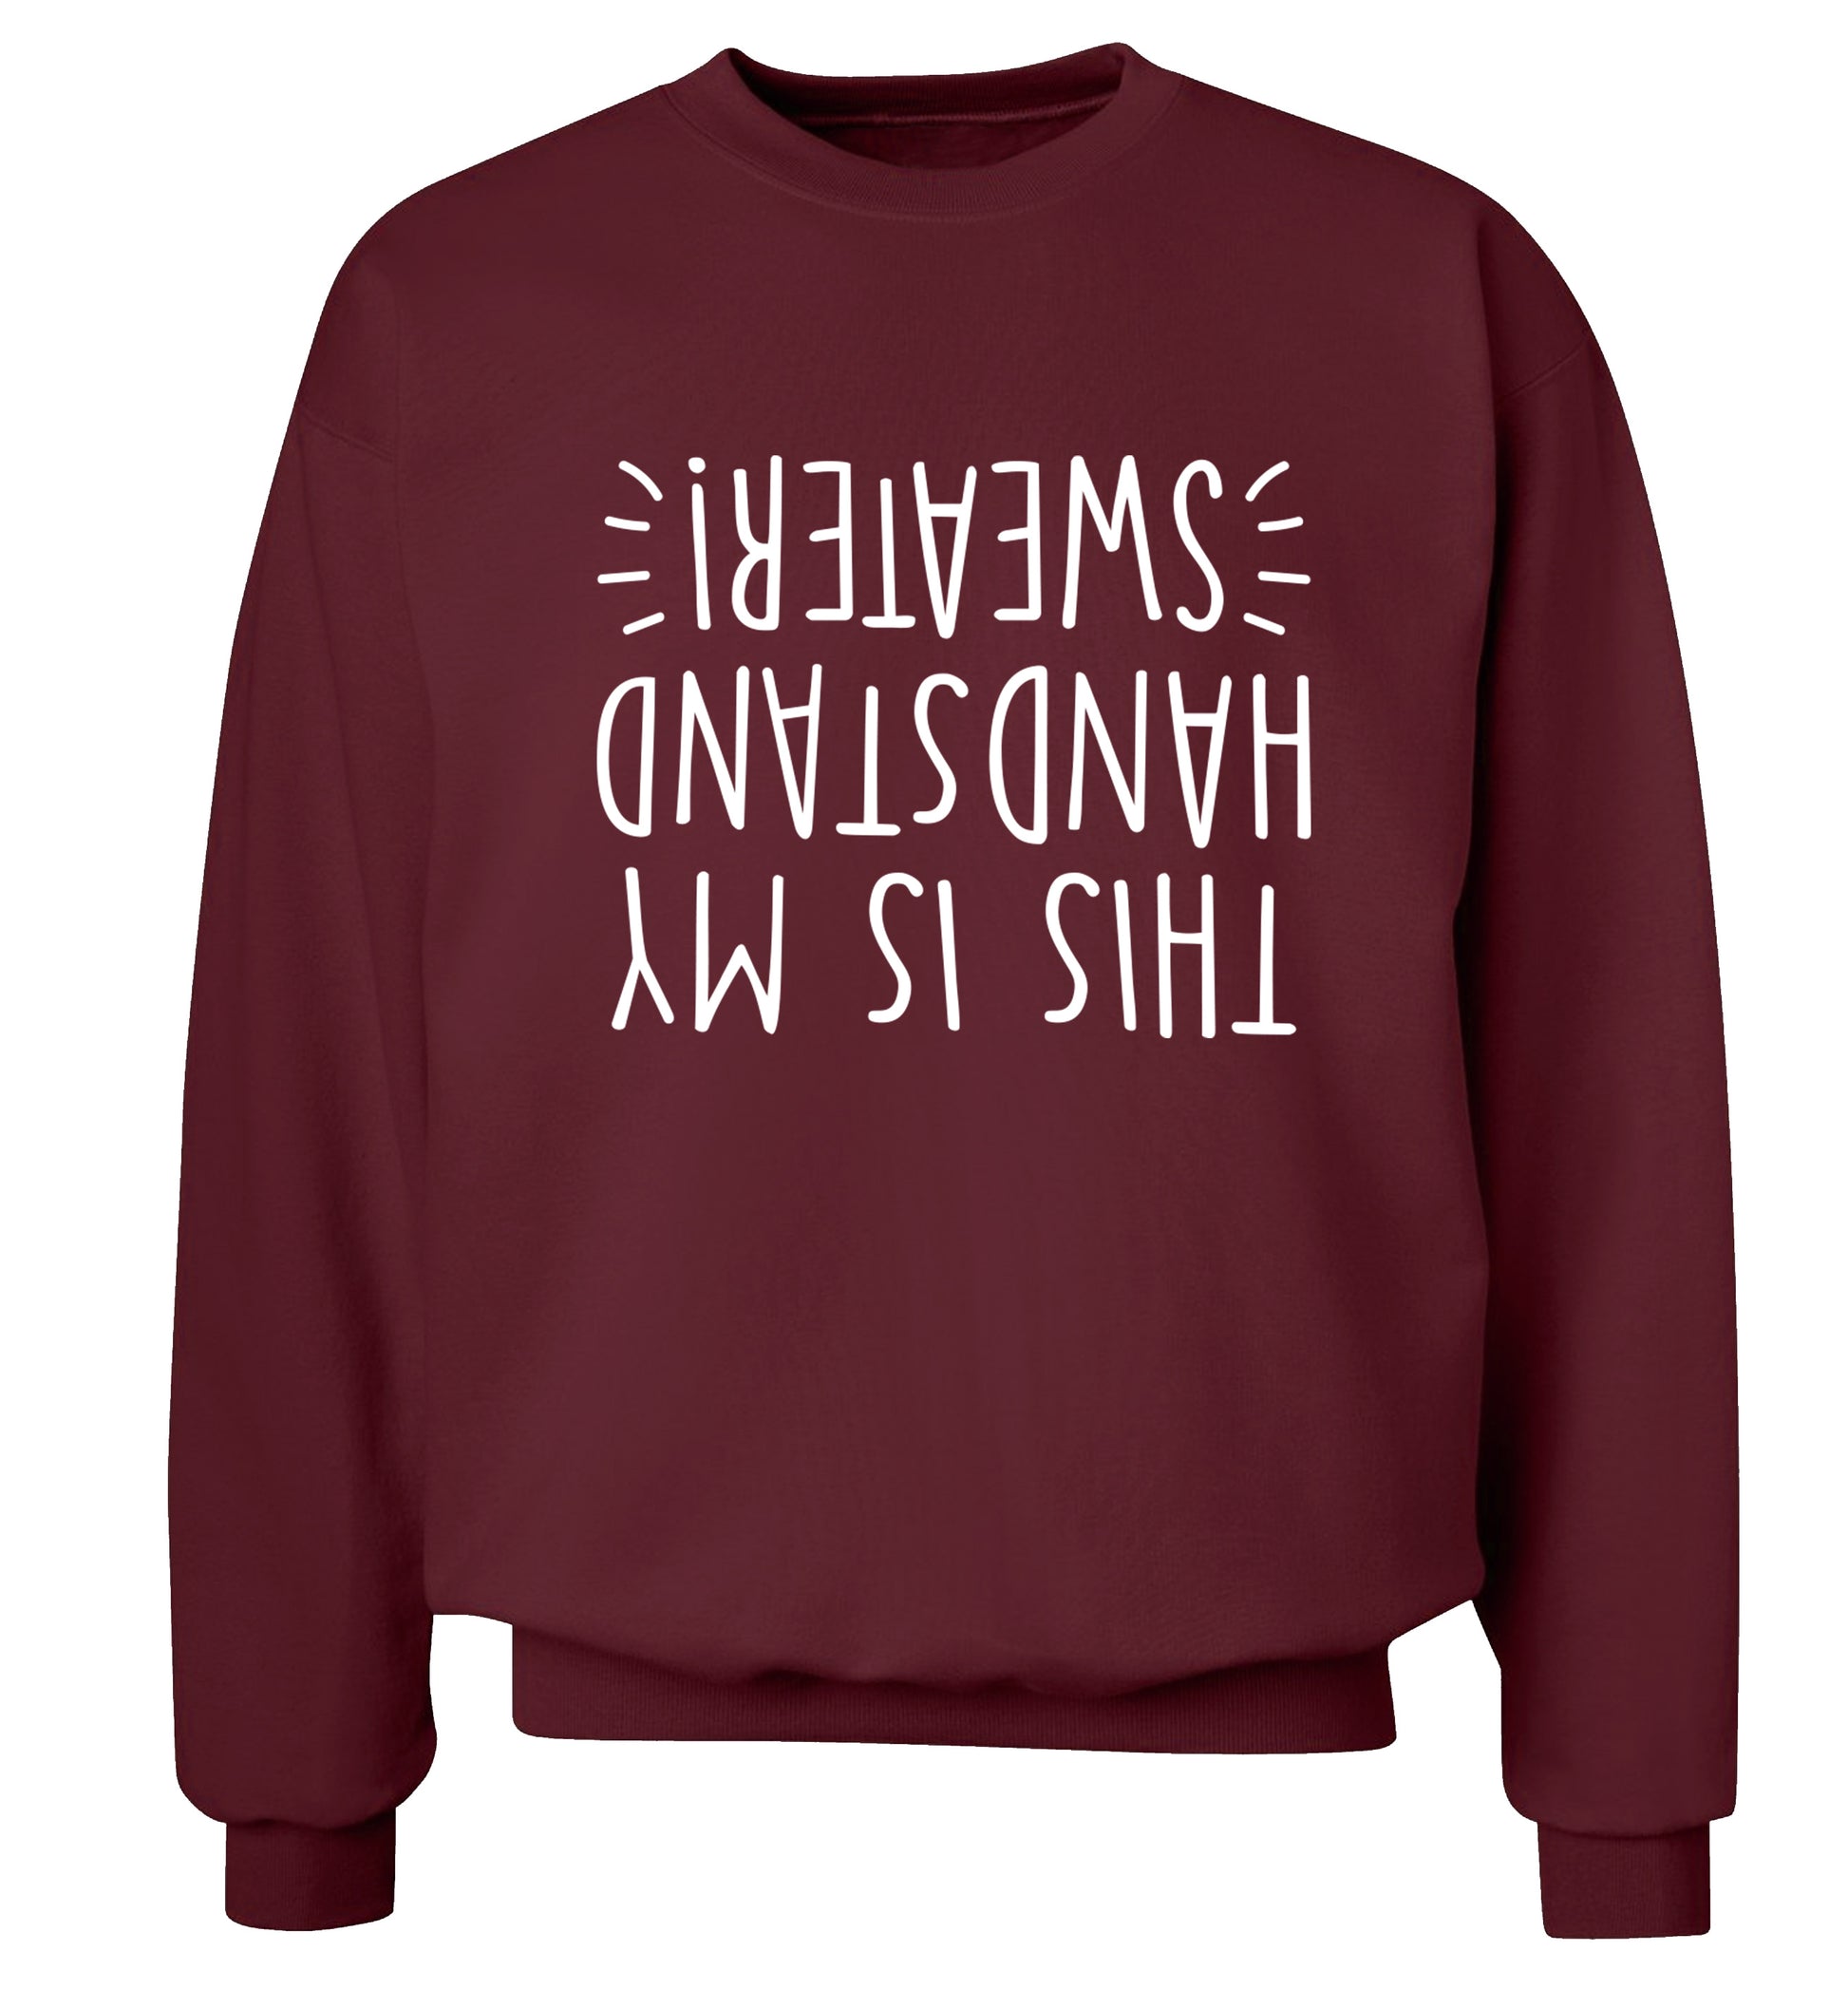 This is my handstand Adult's unisex maroon Sweater 2XL